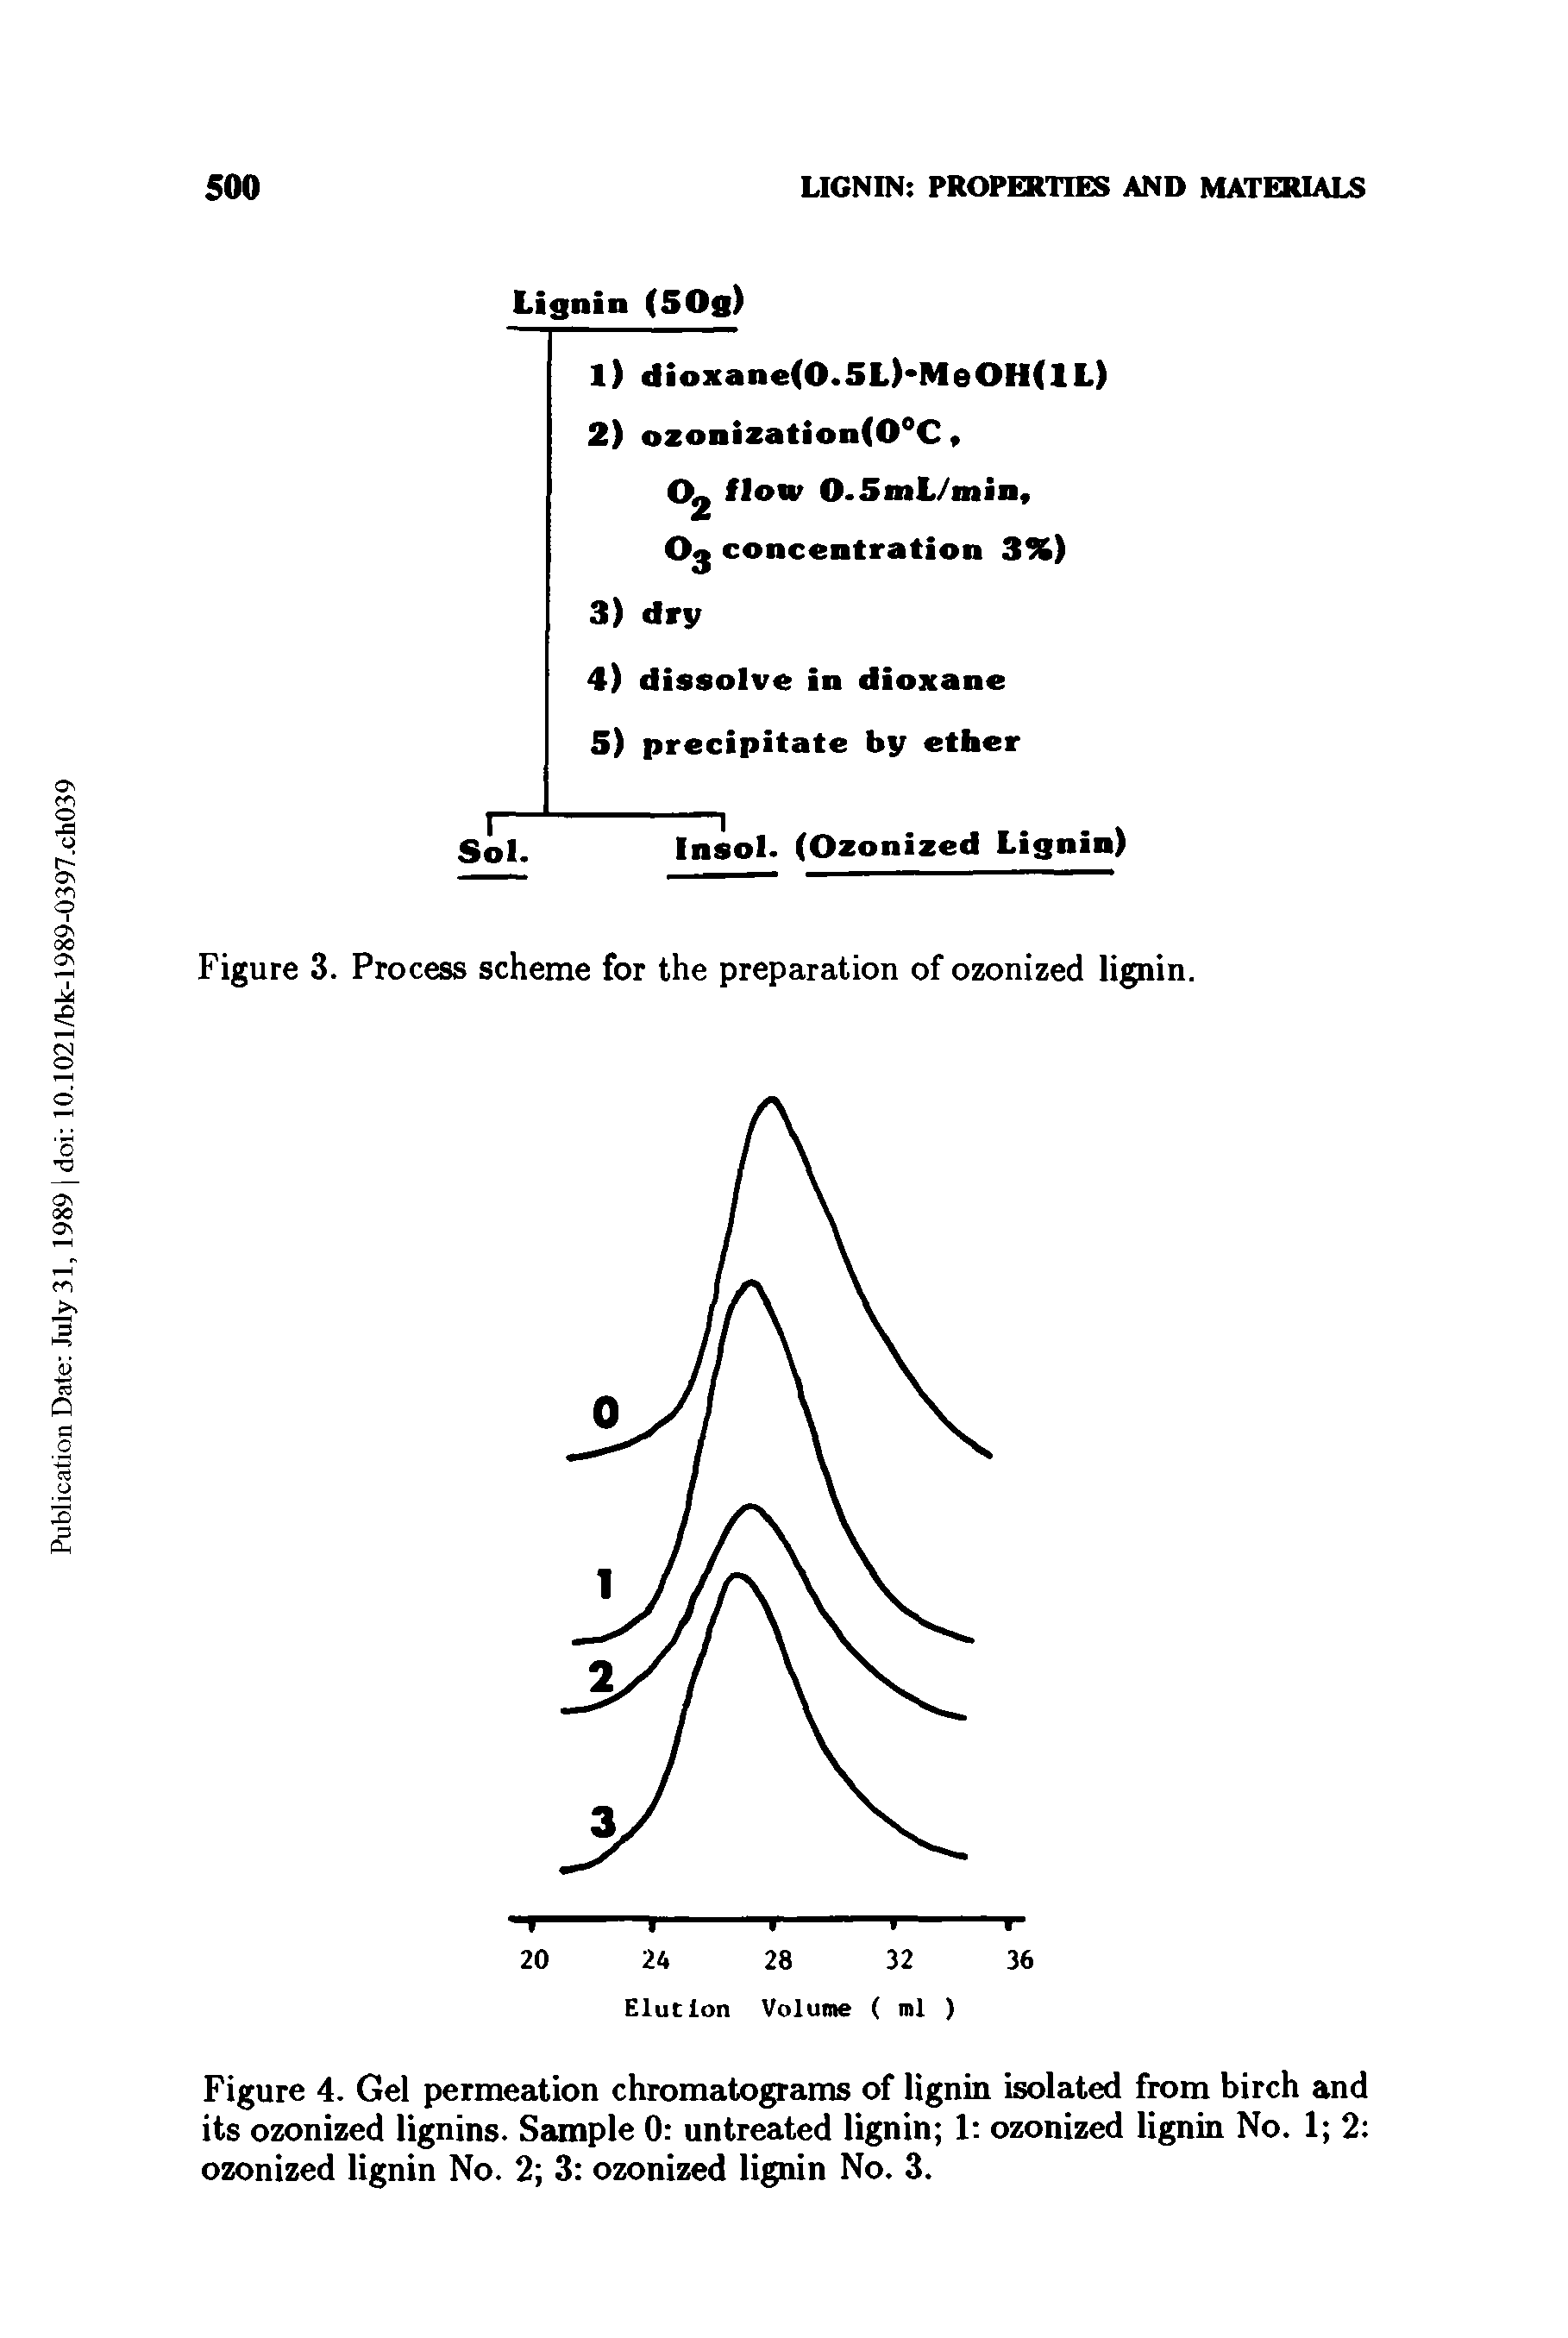 Figure 4. Gel permeation chromatograms of lignin isolated from birch and its ozonized lignins. Sample 0 untreated lignin 1 ozonized lignin No. 1 2 ozonized lignin No. 2 3 ozonized lignin No. 3.